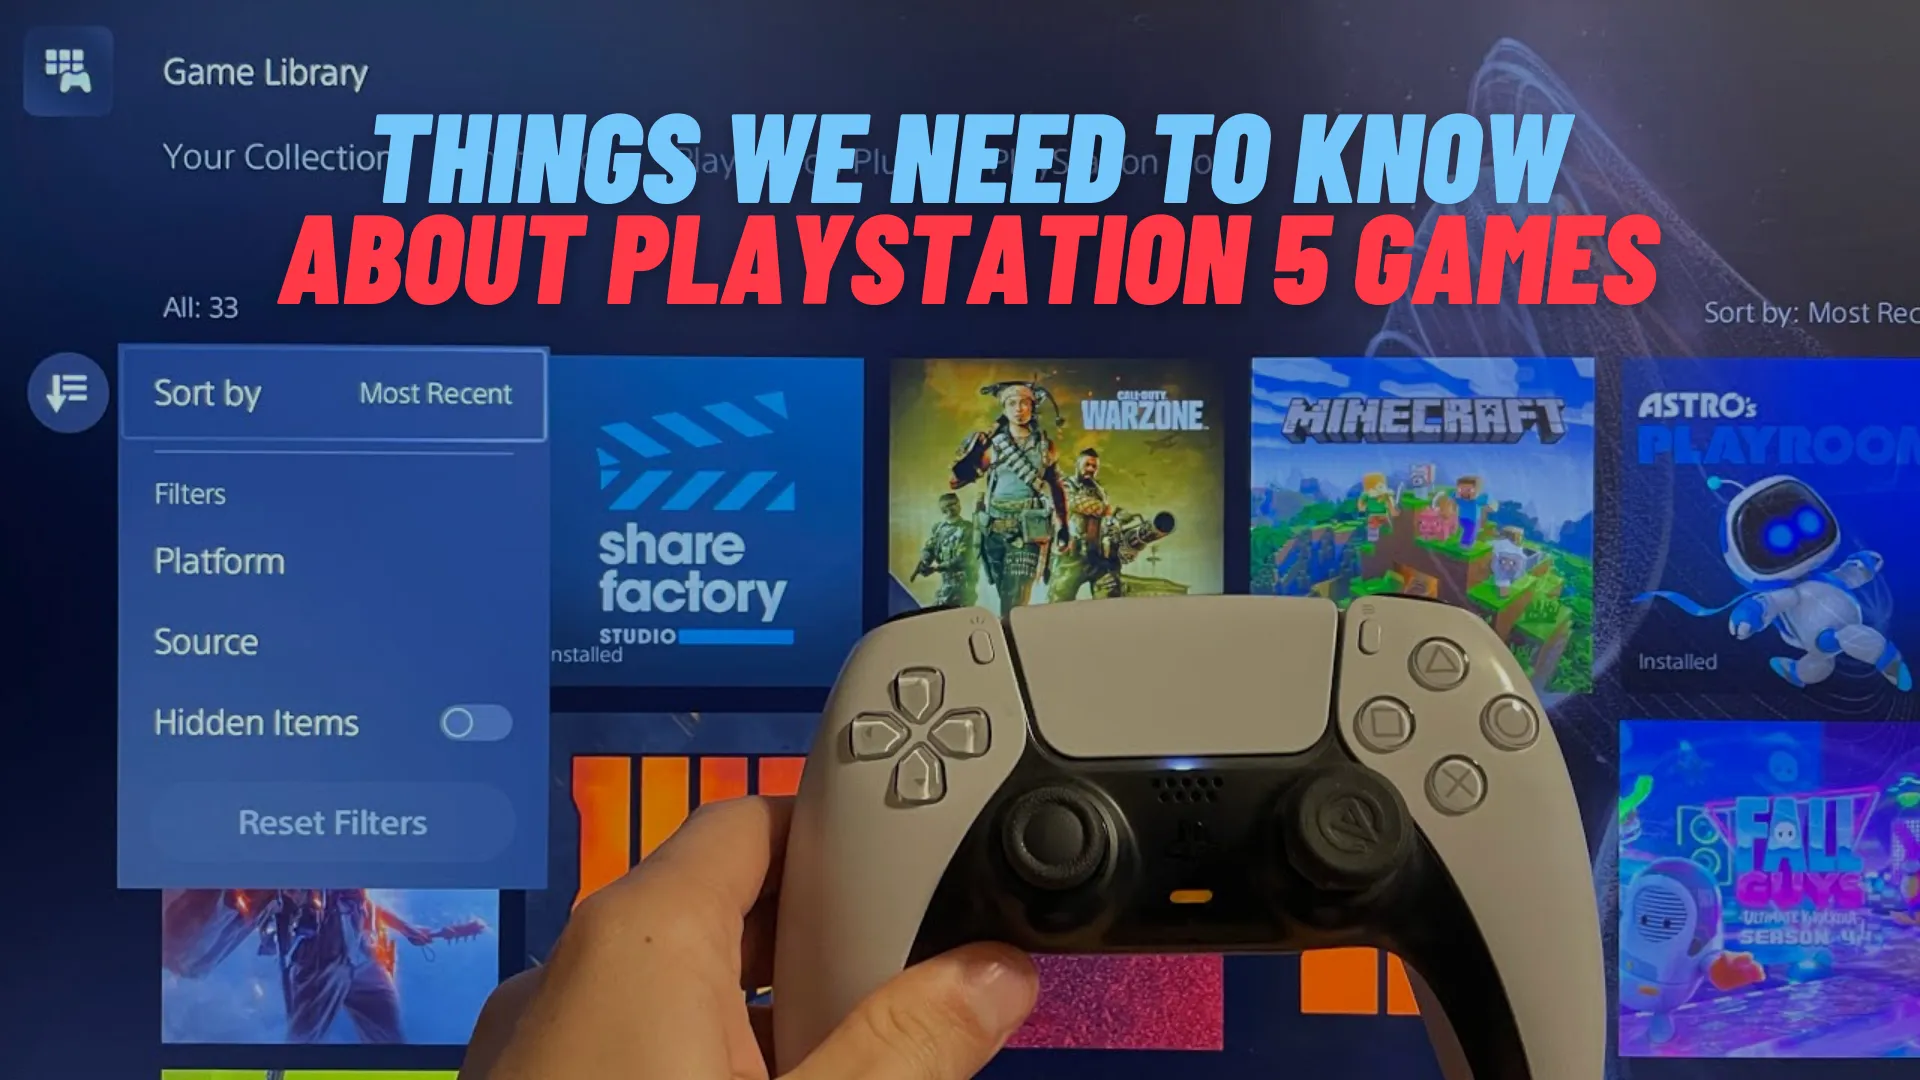 Things We Need to Know About the Recent Playstation 5 Games